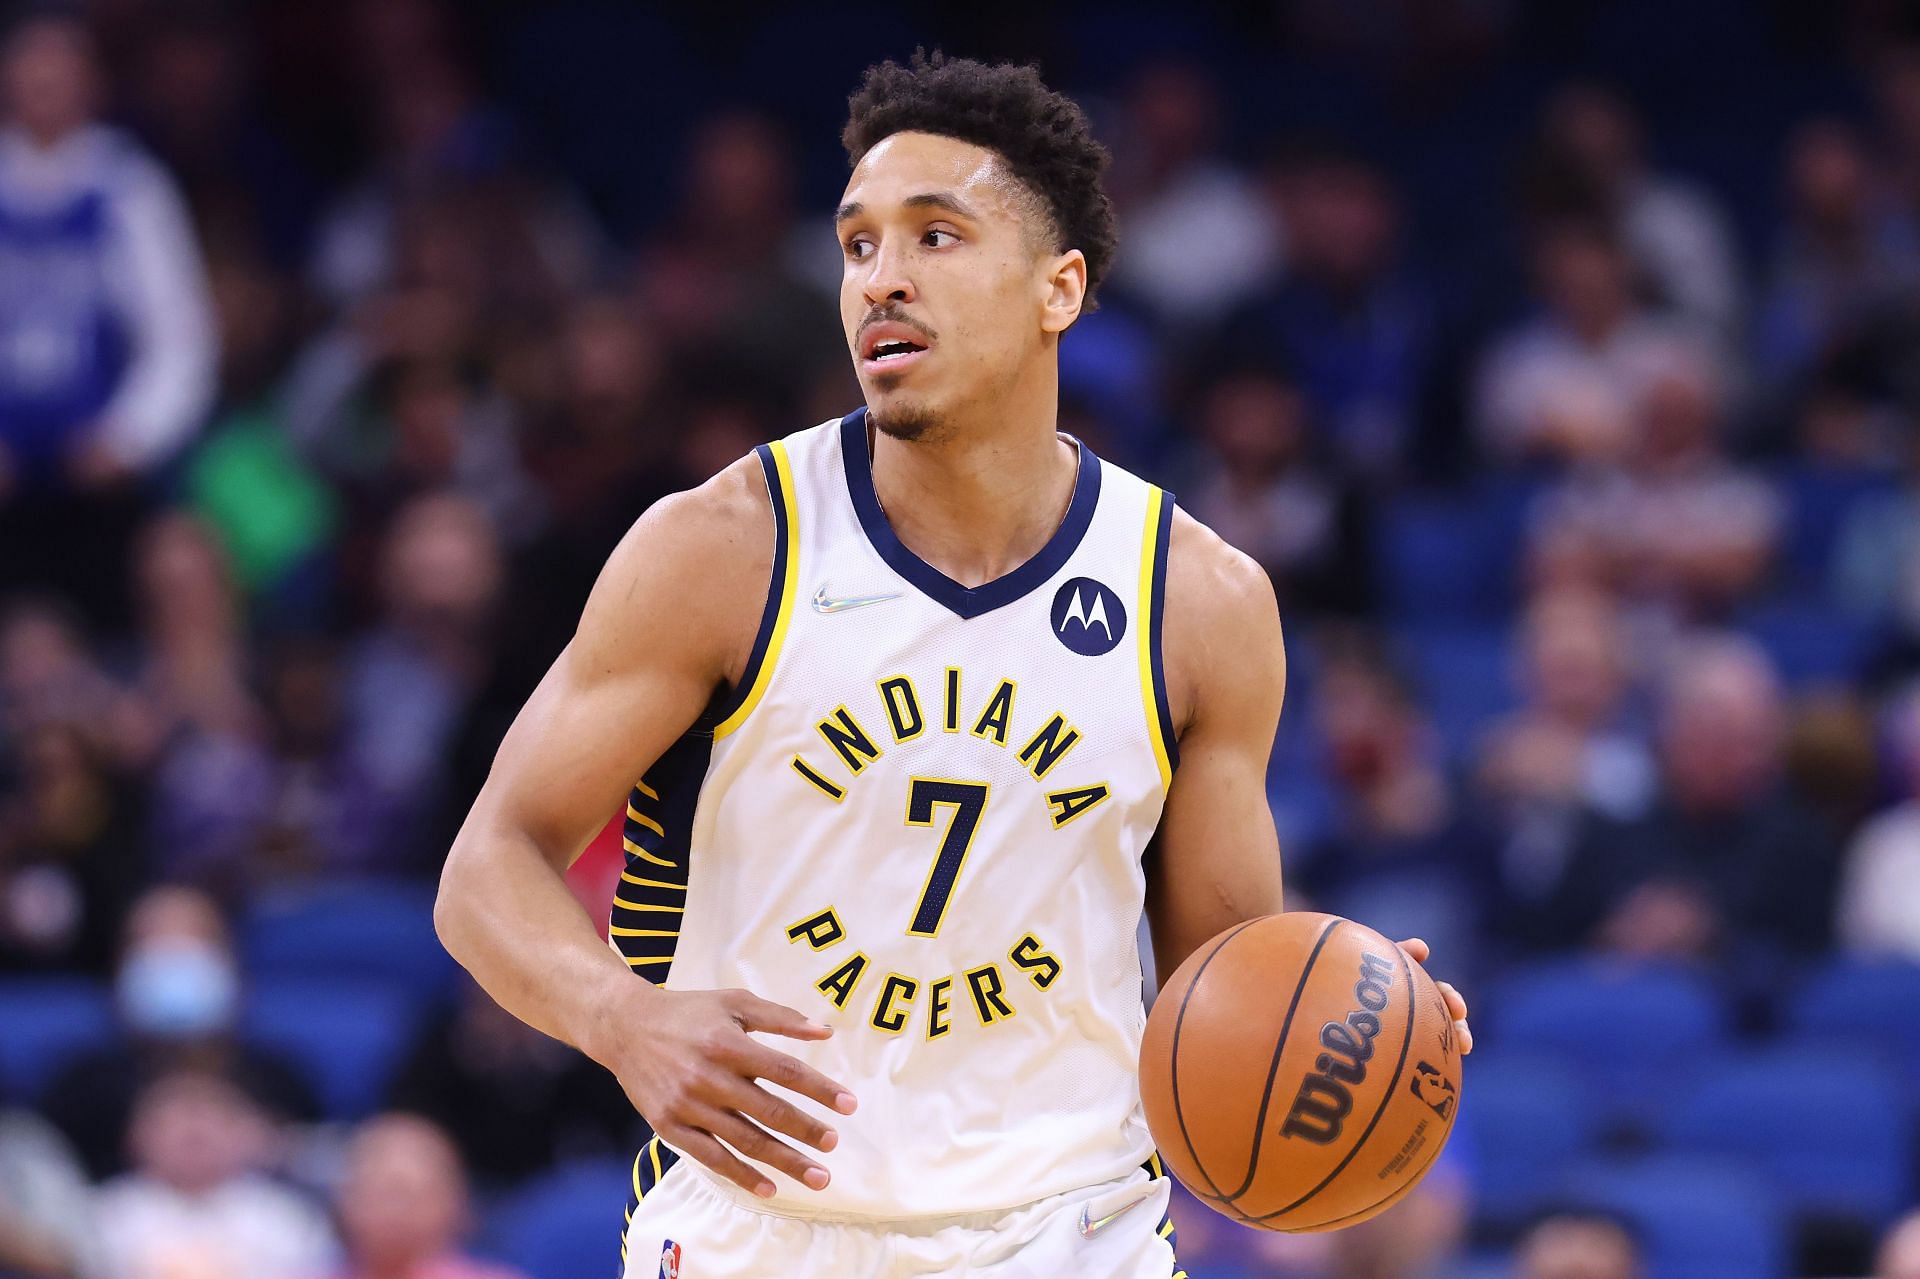 Two Indiana Pacers players have featured in this NBA Rumors roundup.